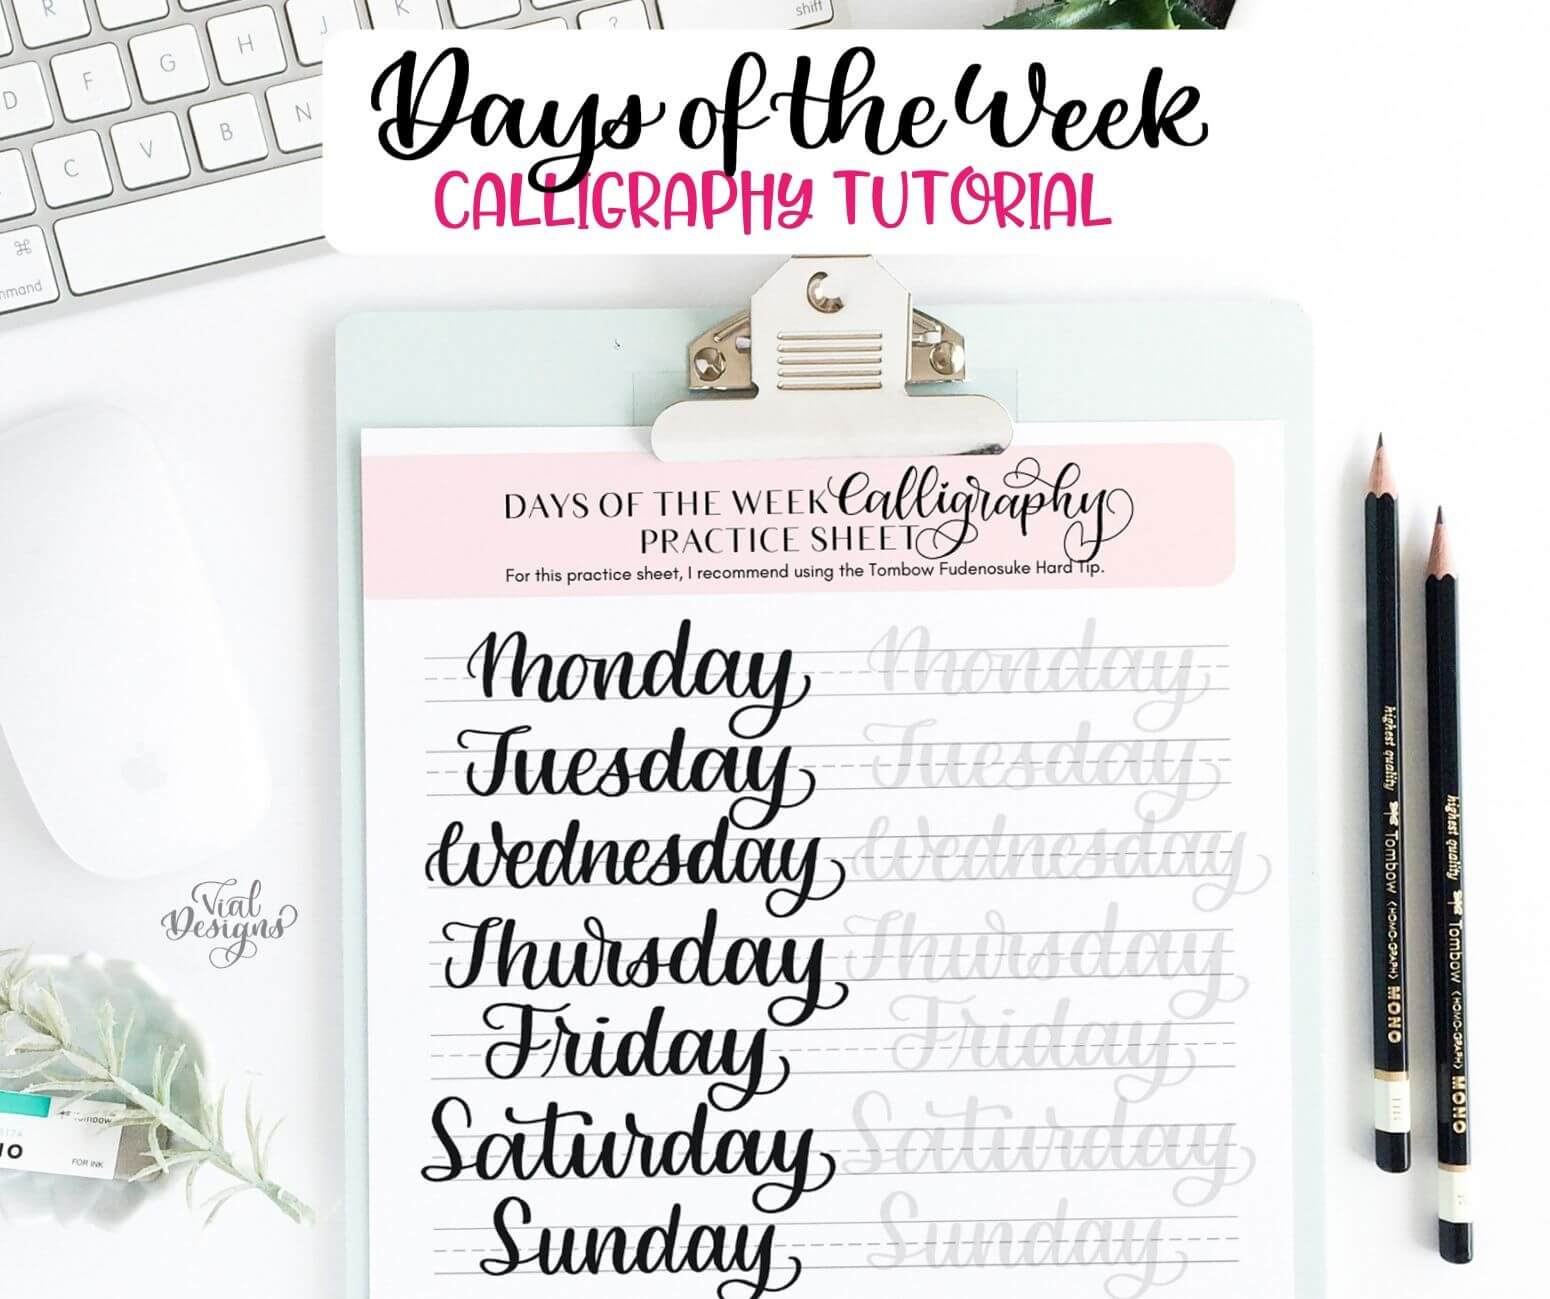 Days Of The Week Calligraphy Tutorial